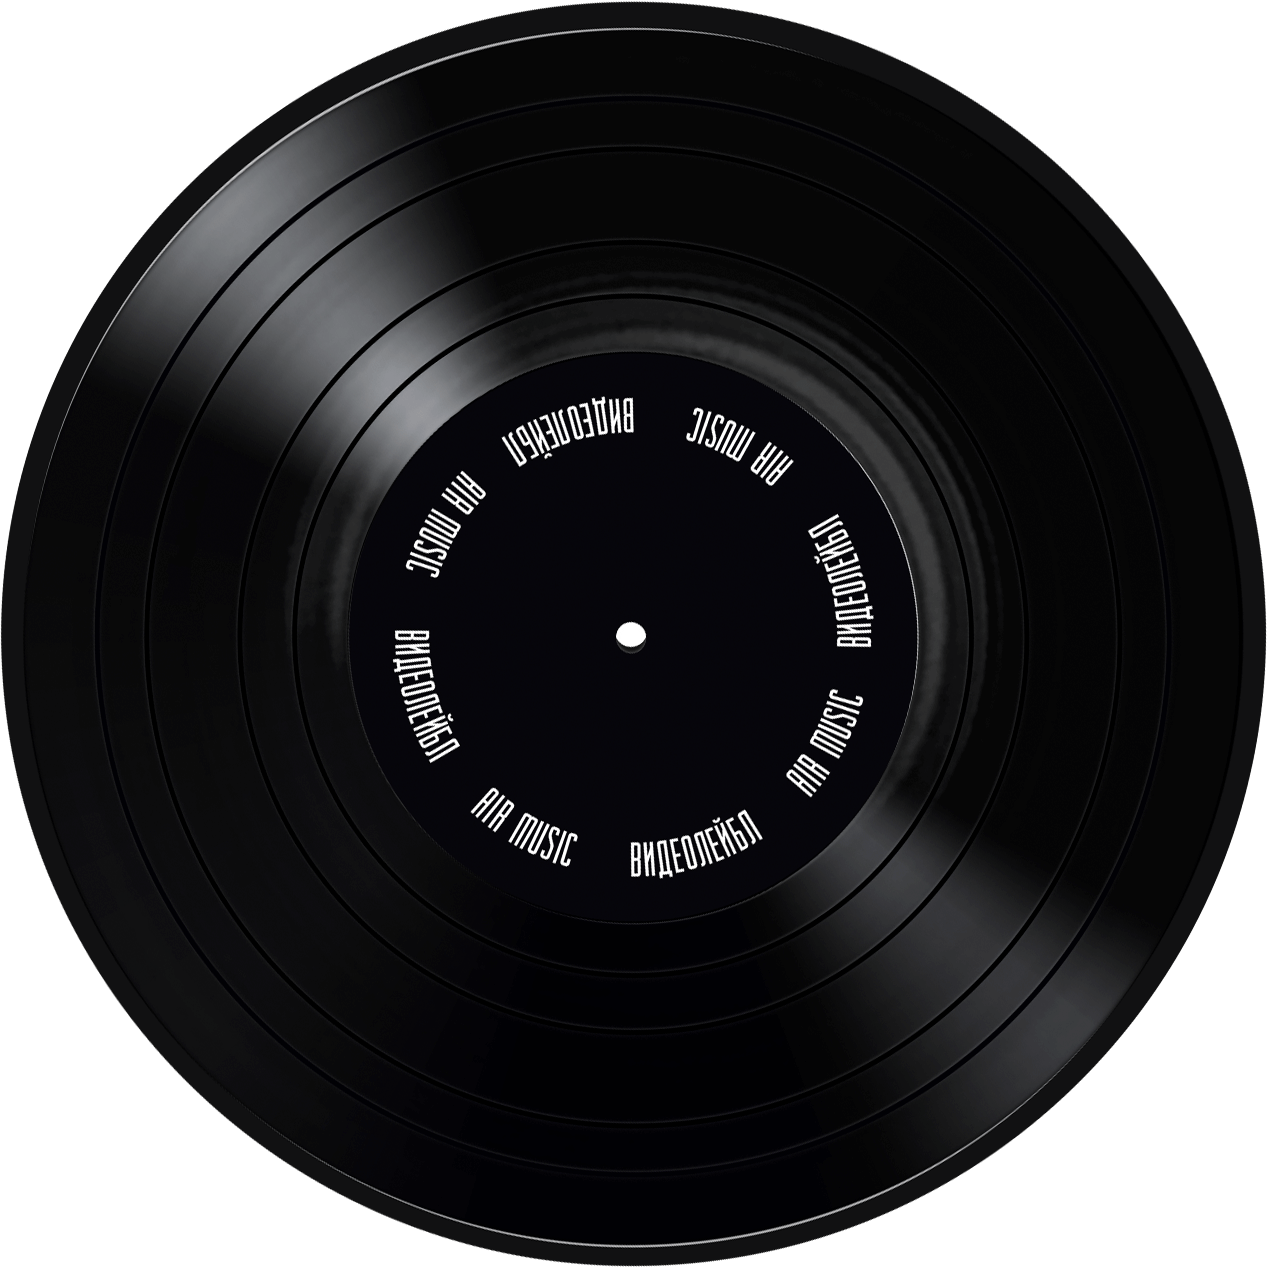 Classic Vinyl Record Top View PNG image